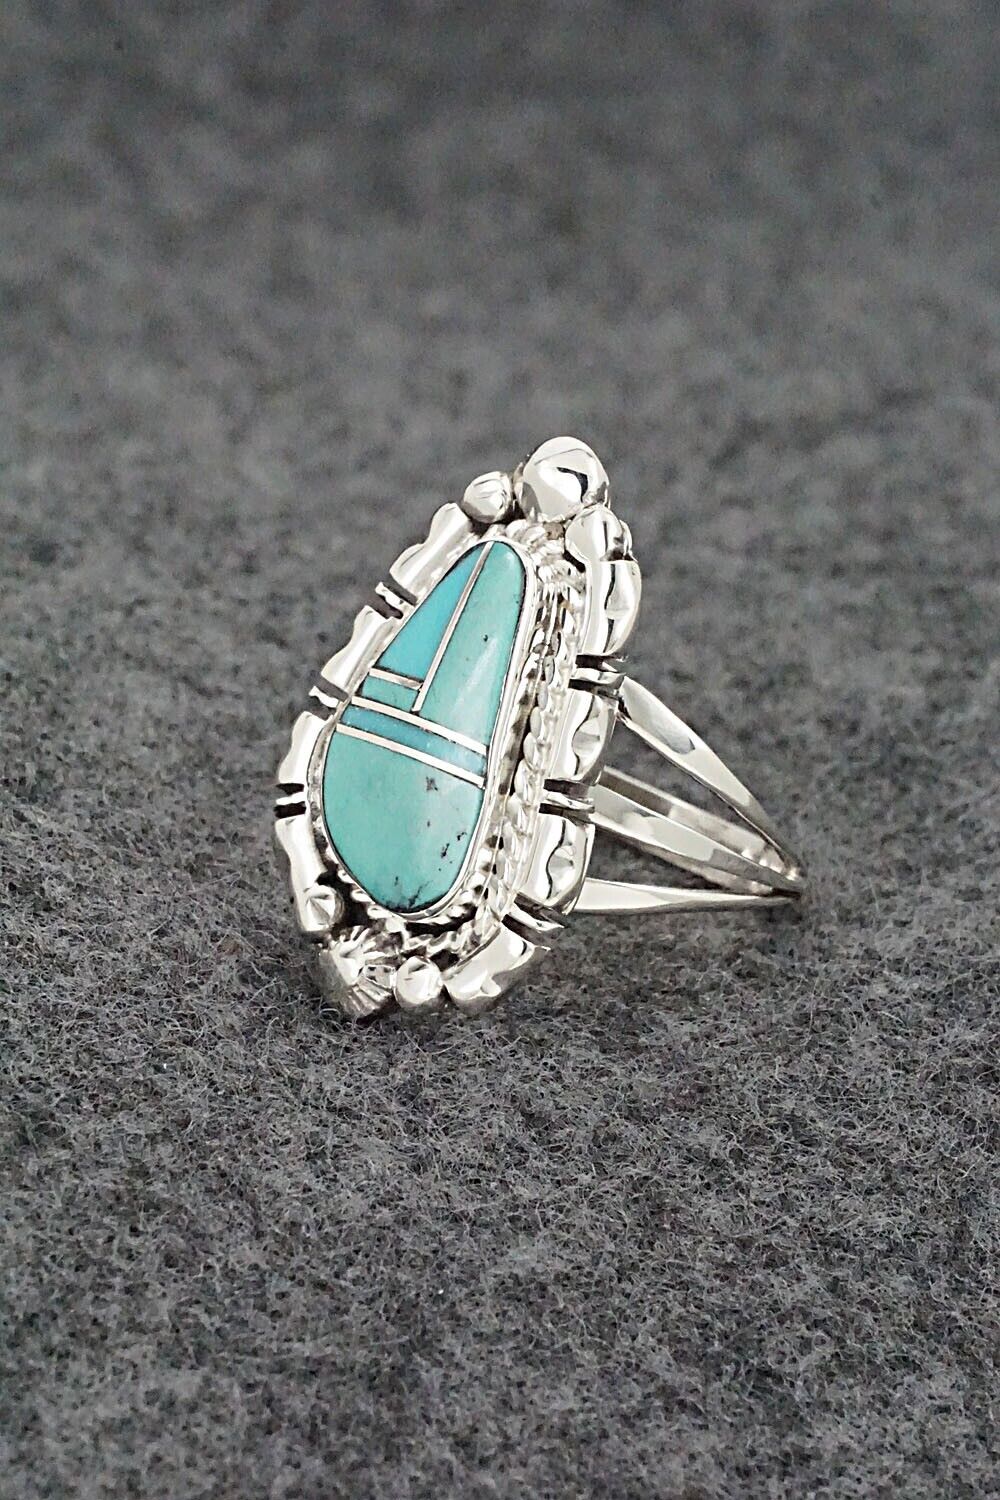 Turquoise & Sterling Silver Ring - James Manygoats - Size 8